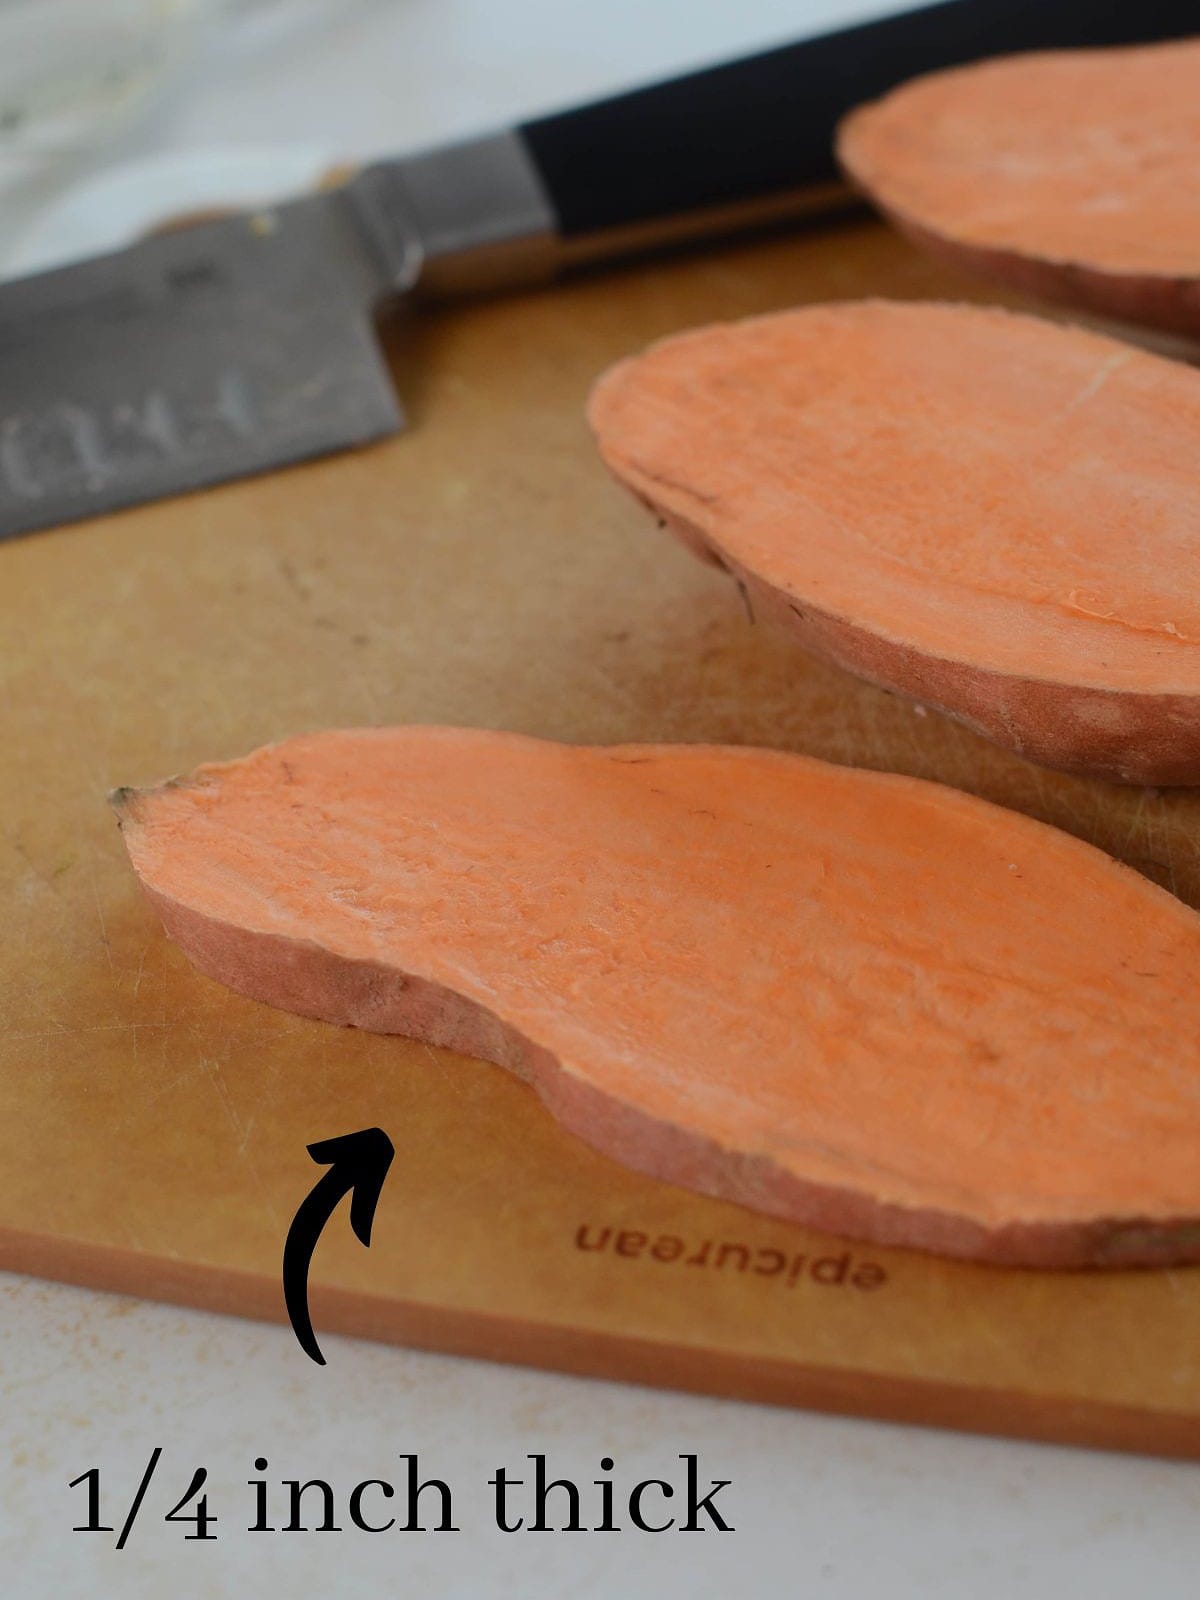 photo showing the proper thickness of the sweet potatoes.